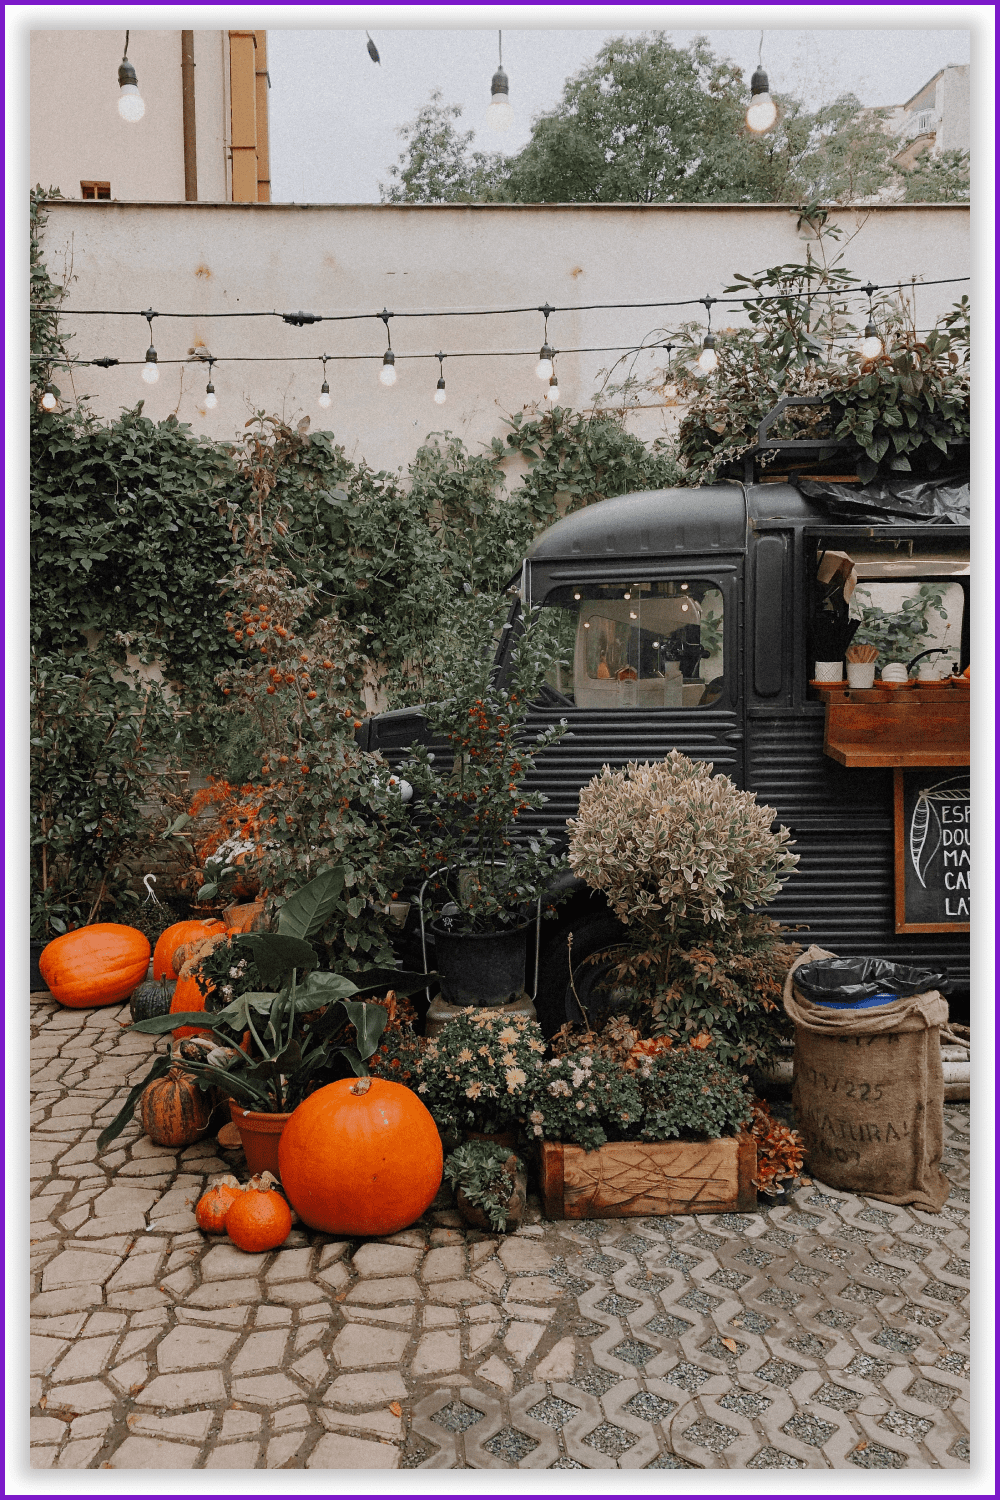 Truck surrounded by pumpkins and flowers.